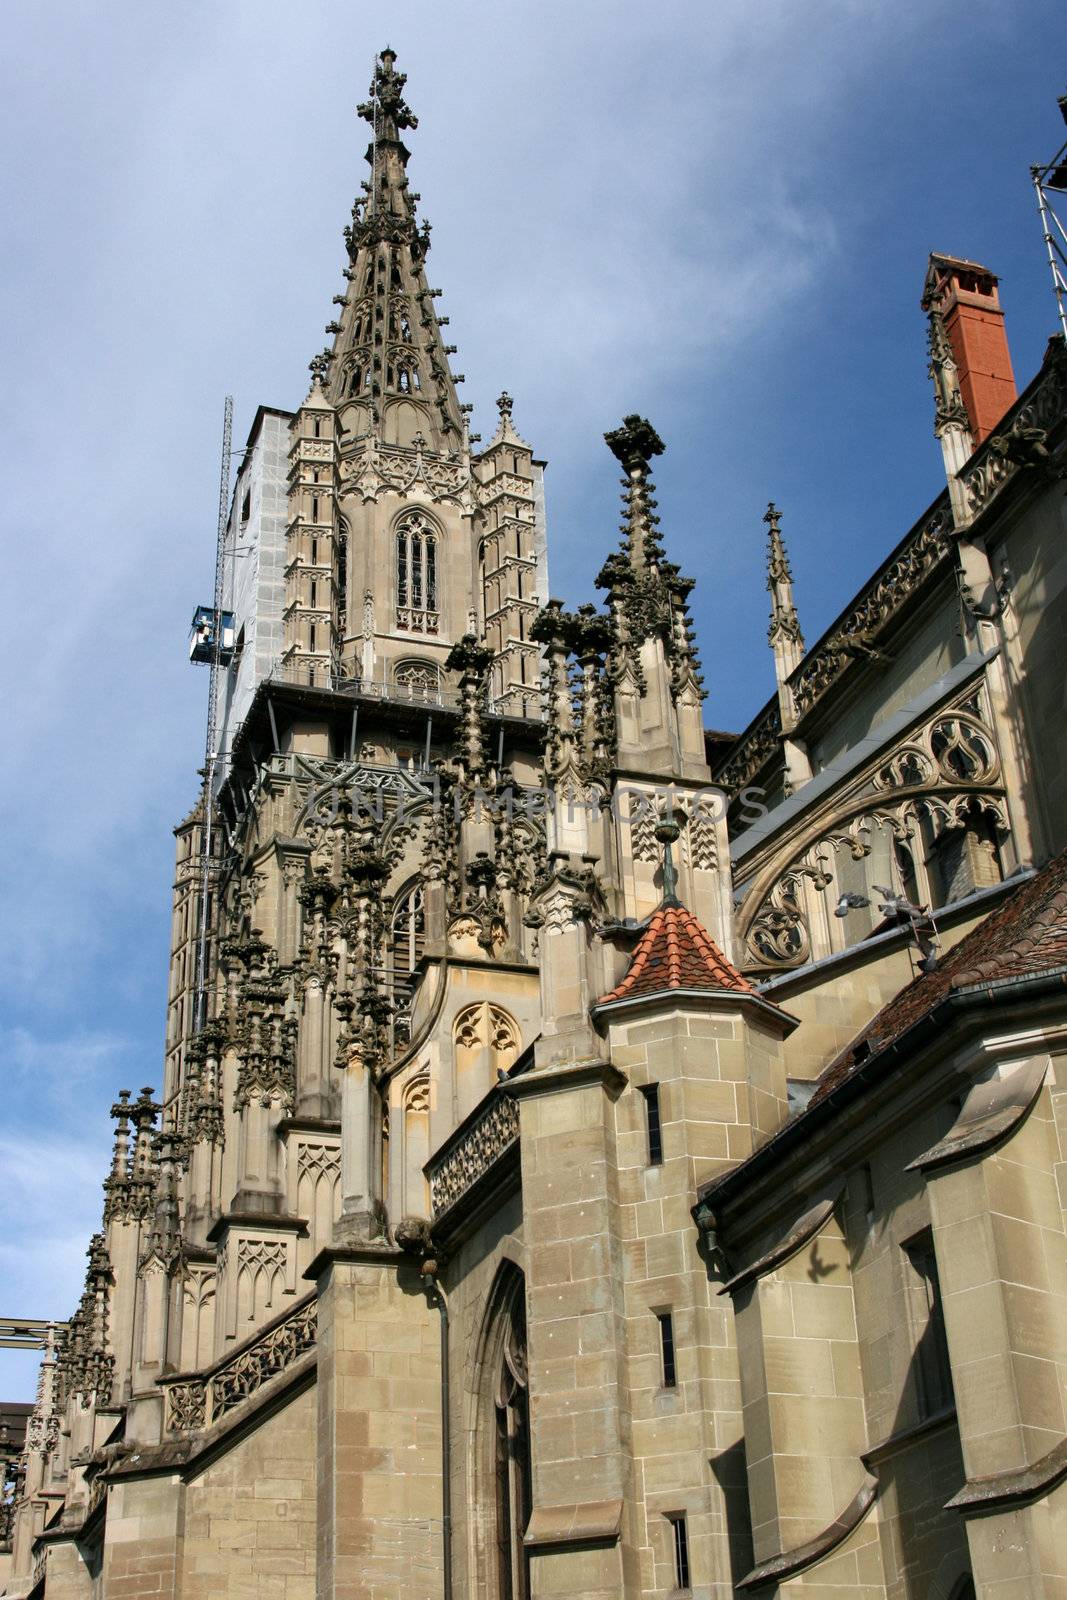 The Muenster of Berne (German: Berner Muenster) is the Gothic cathedral (or minster) in the old city of Berne, Switzerland